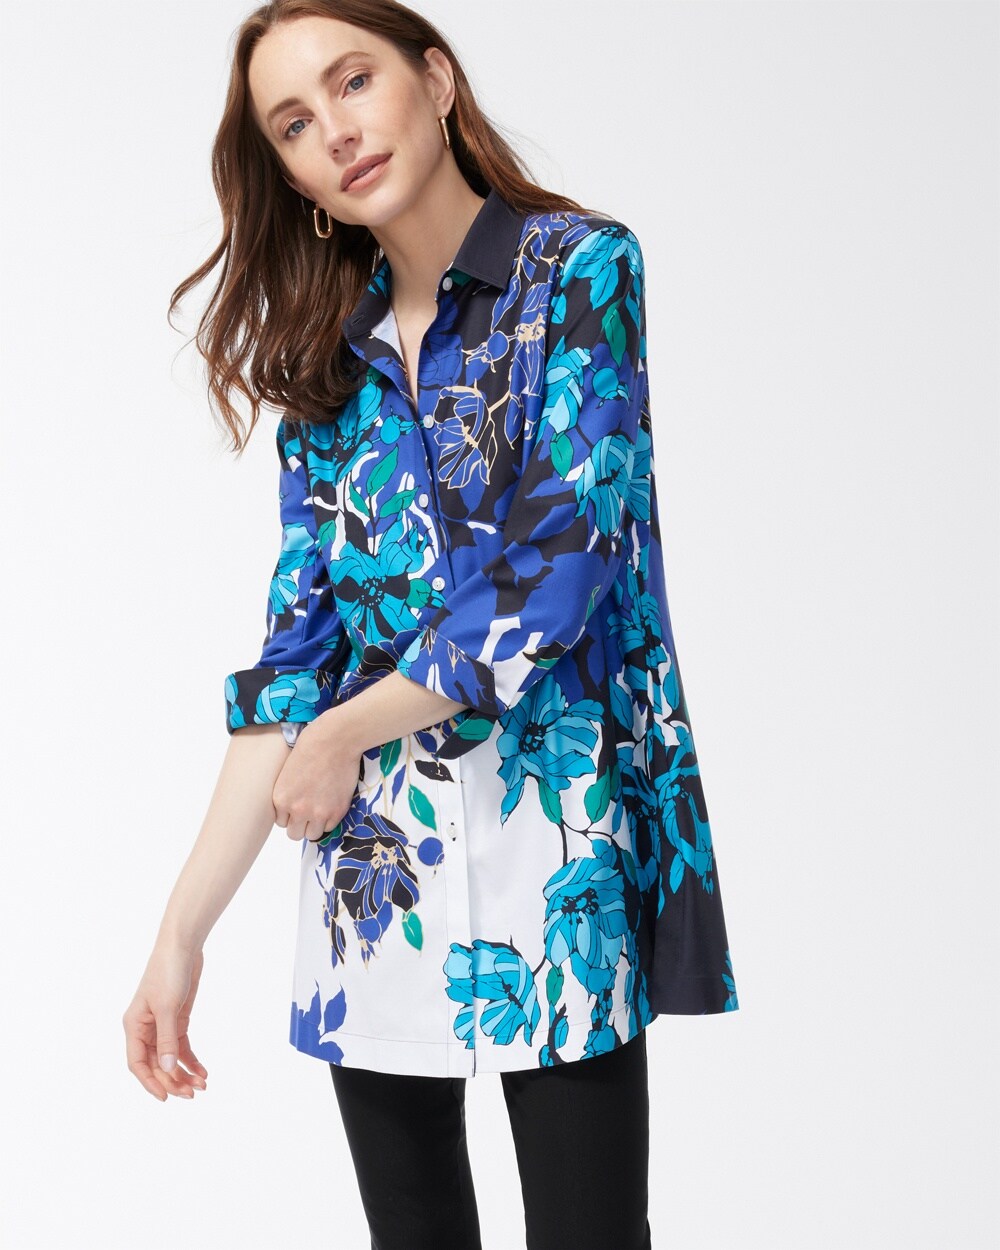 No Iron Stretch 3/4 Sleeve Floral Tunic